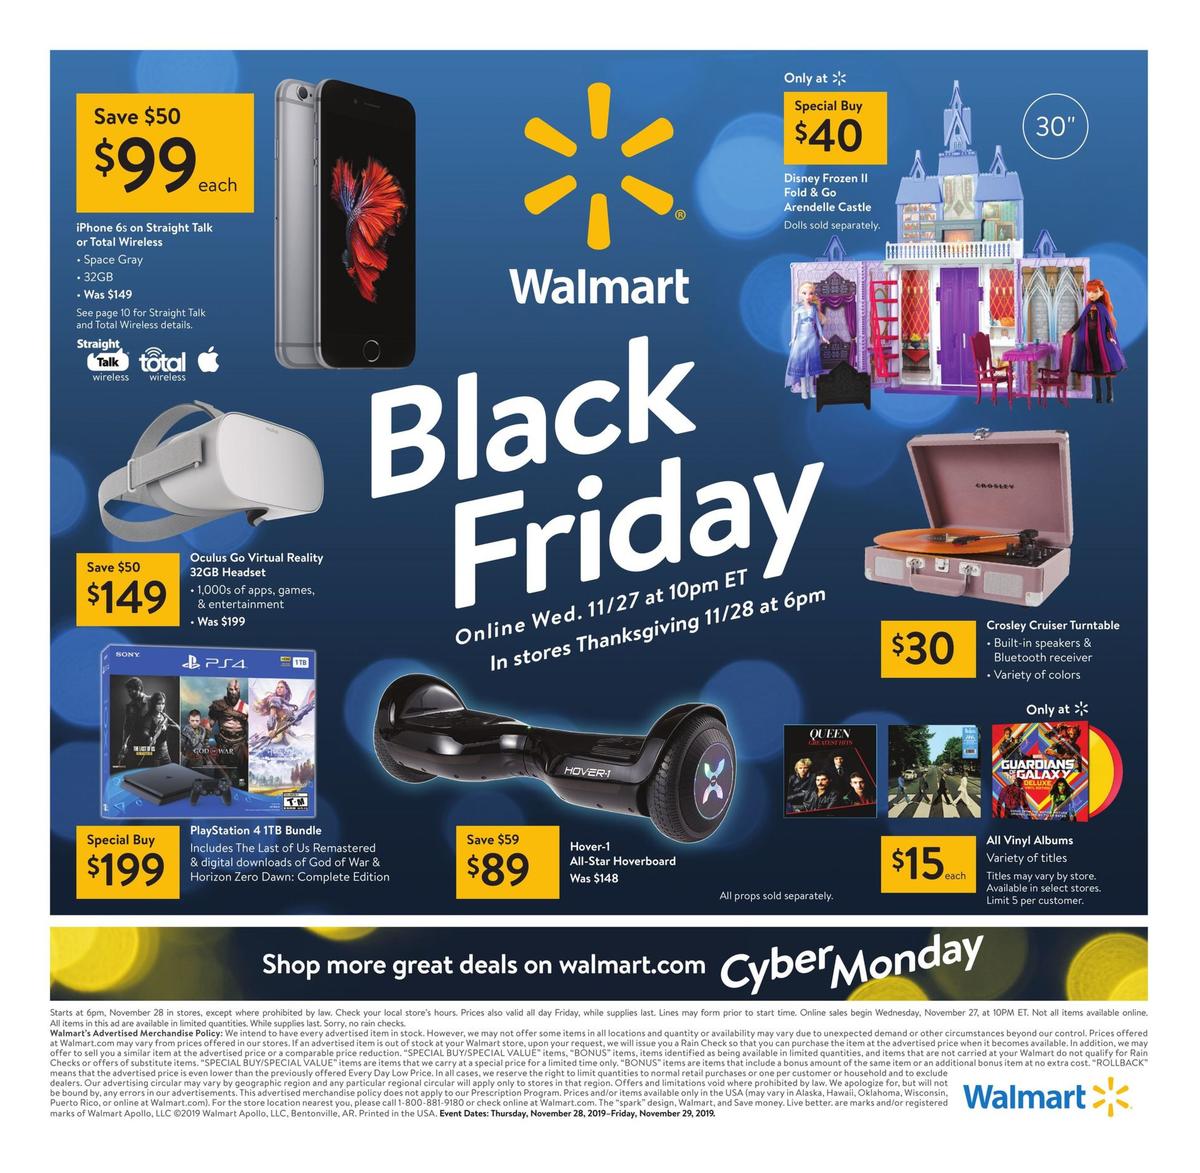 Walmart Black Friday Weekly Ads and Special Buys from November 28 Page 2